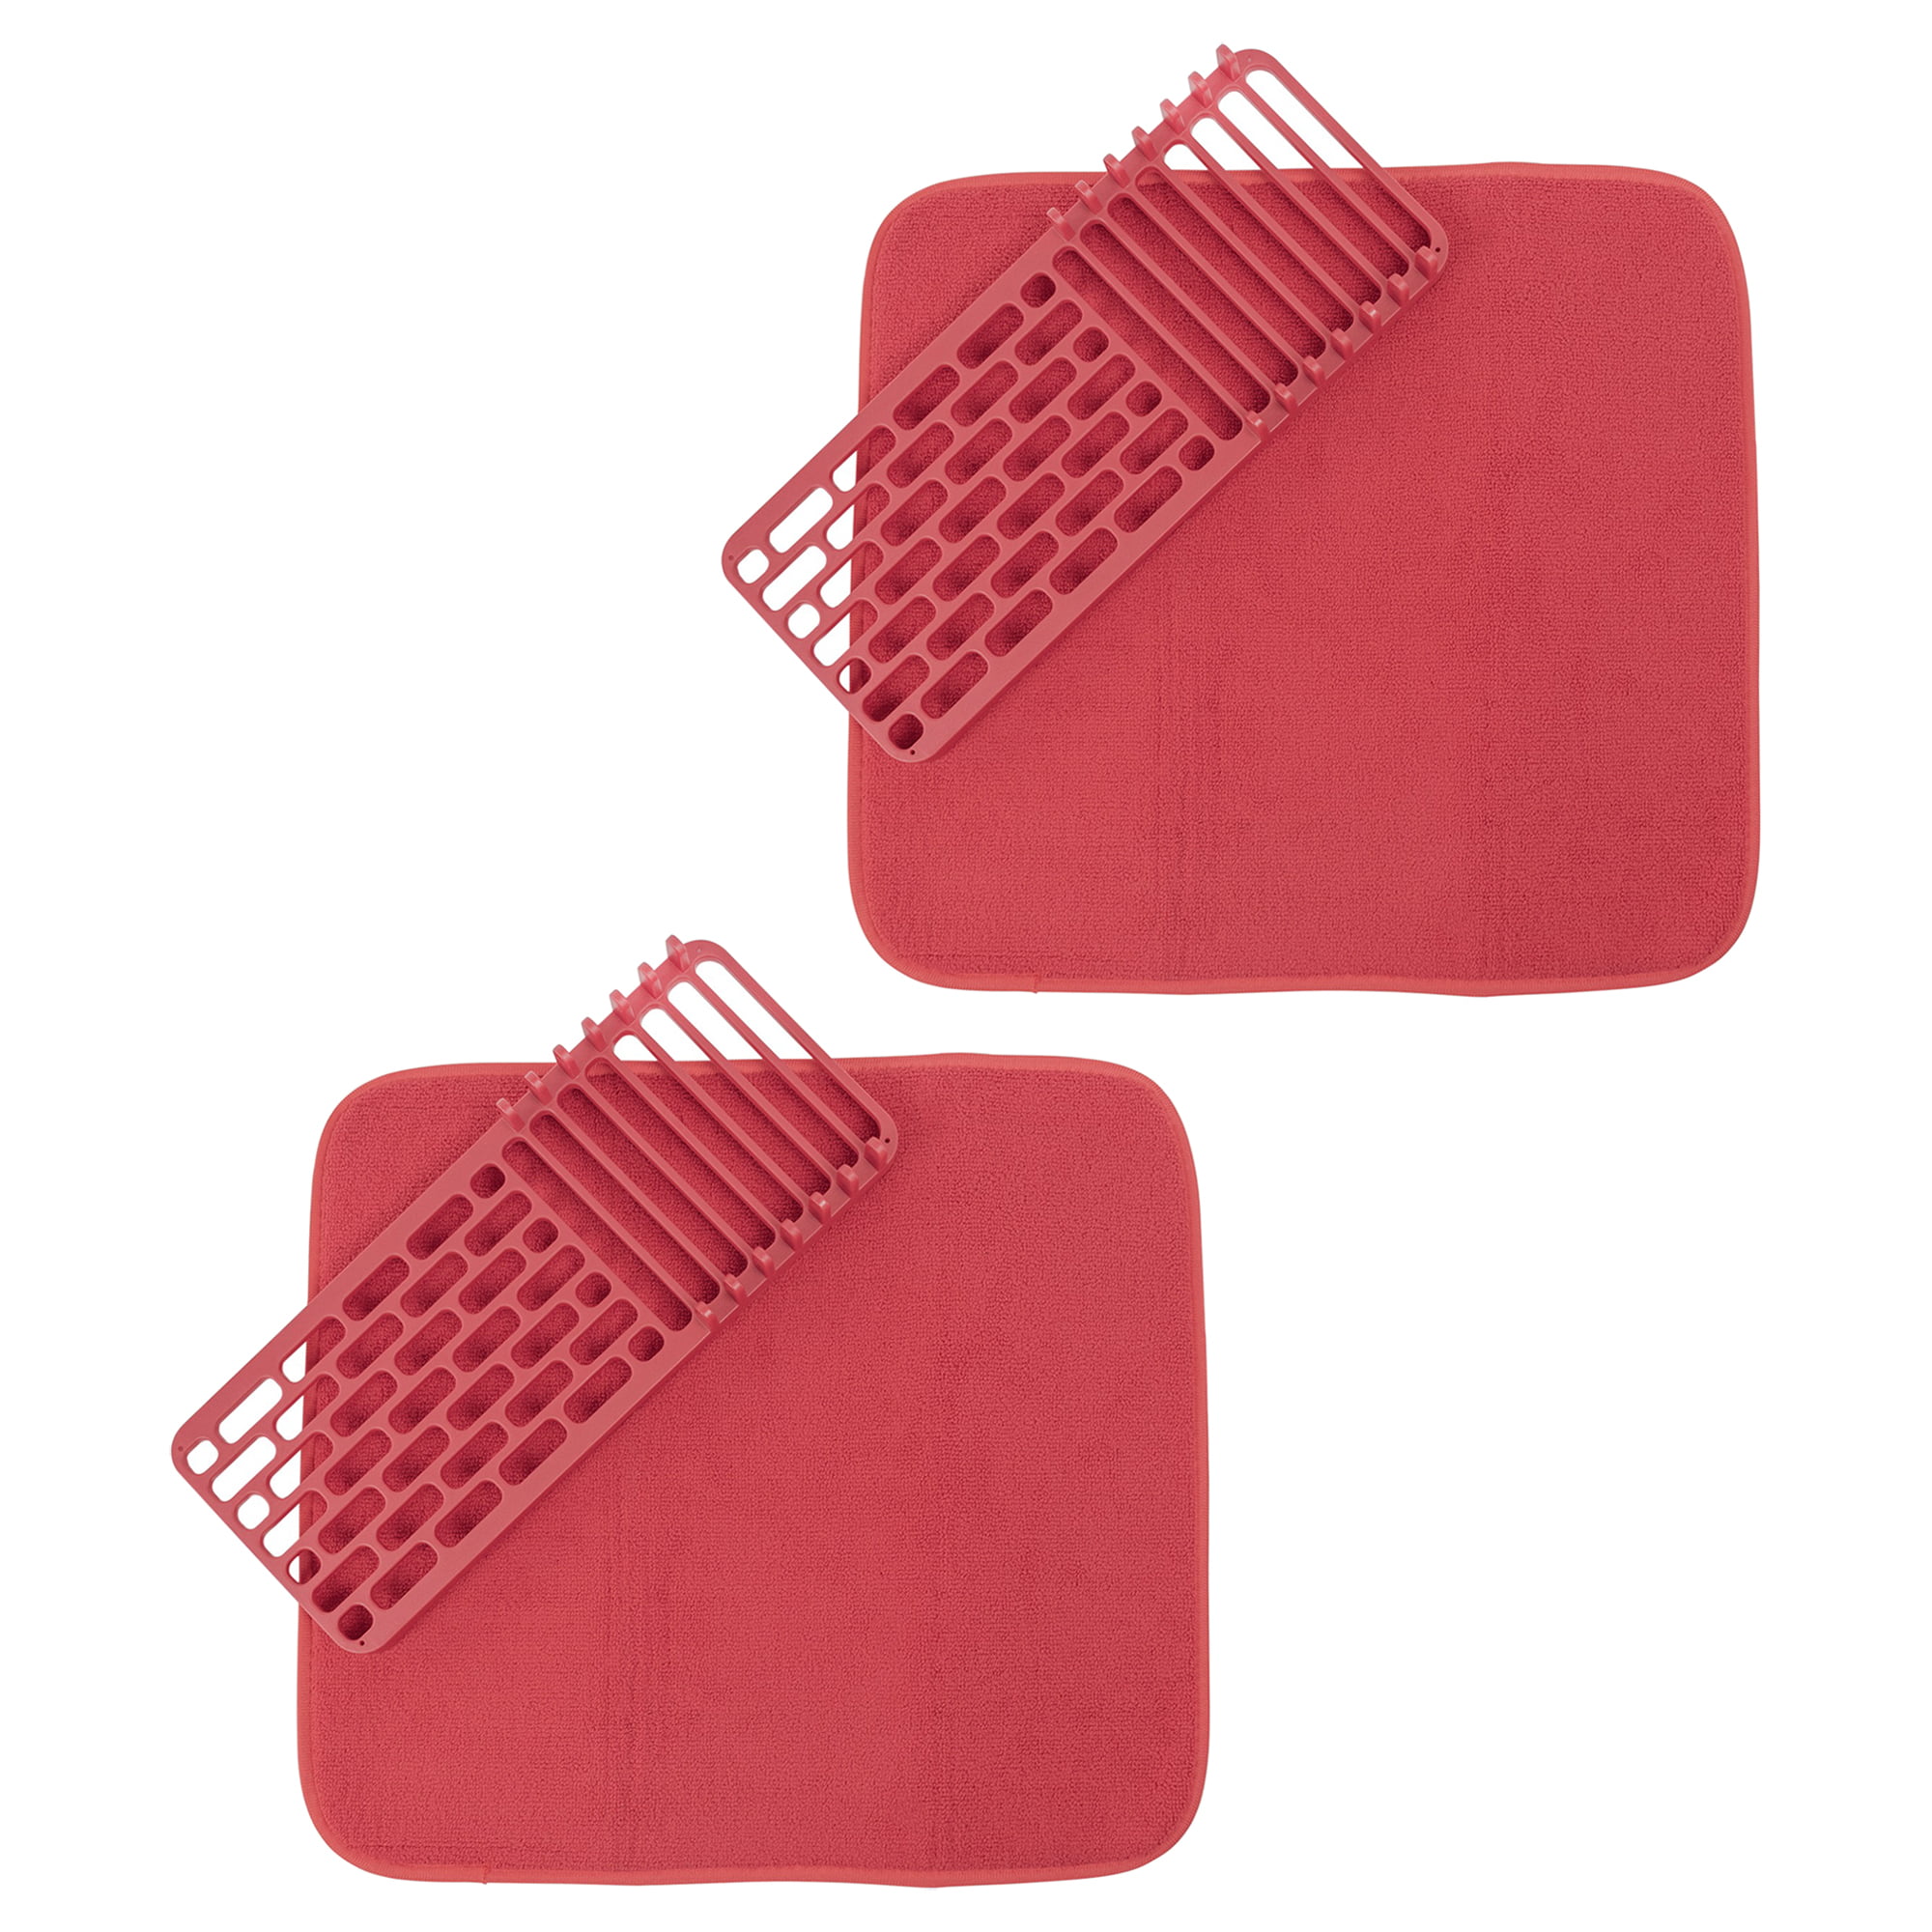 NEW! Cuisinart Dish Drying Mat with Drying Rack 18 x 16 Red